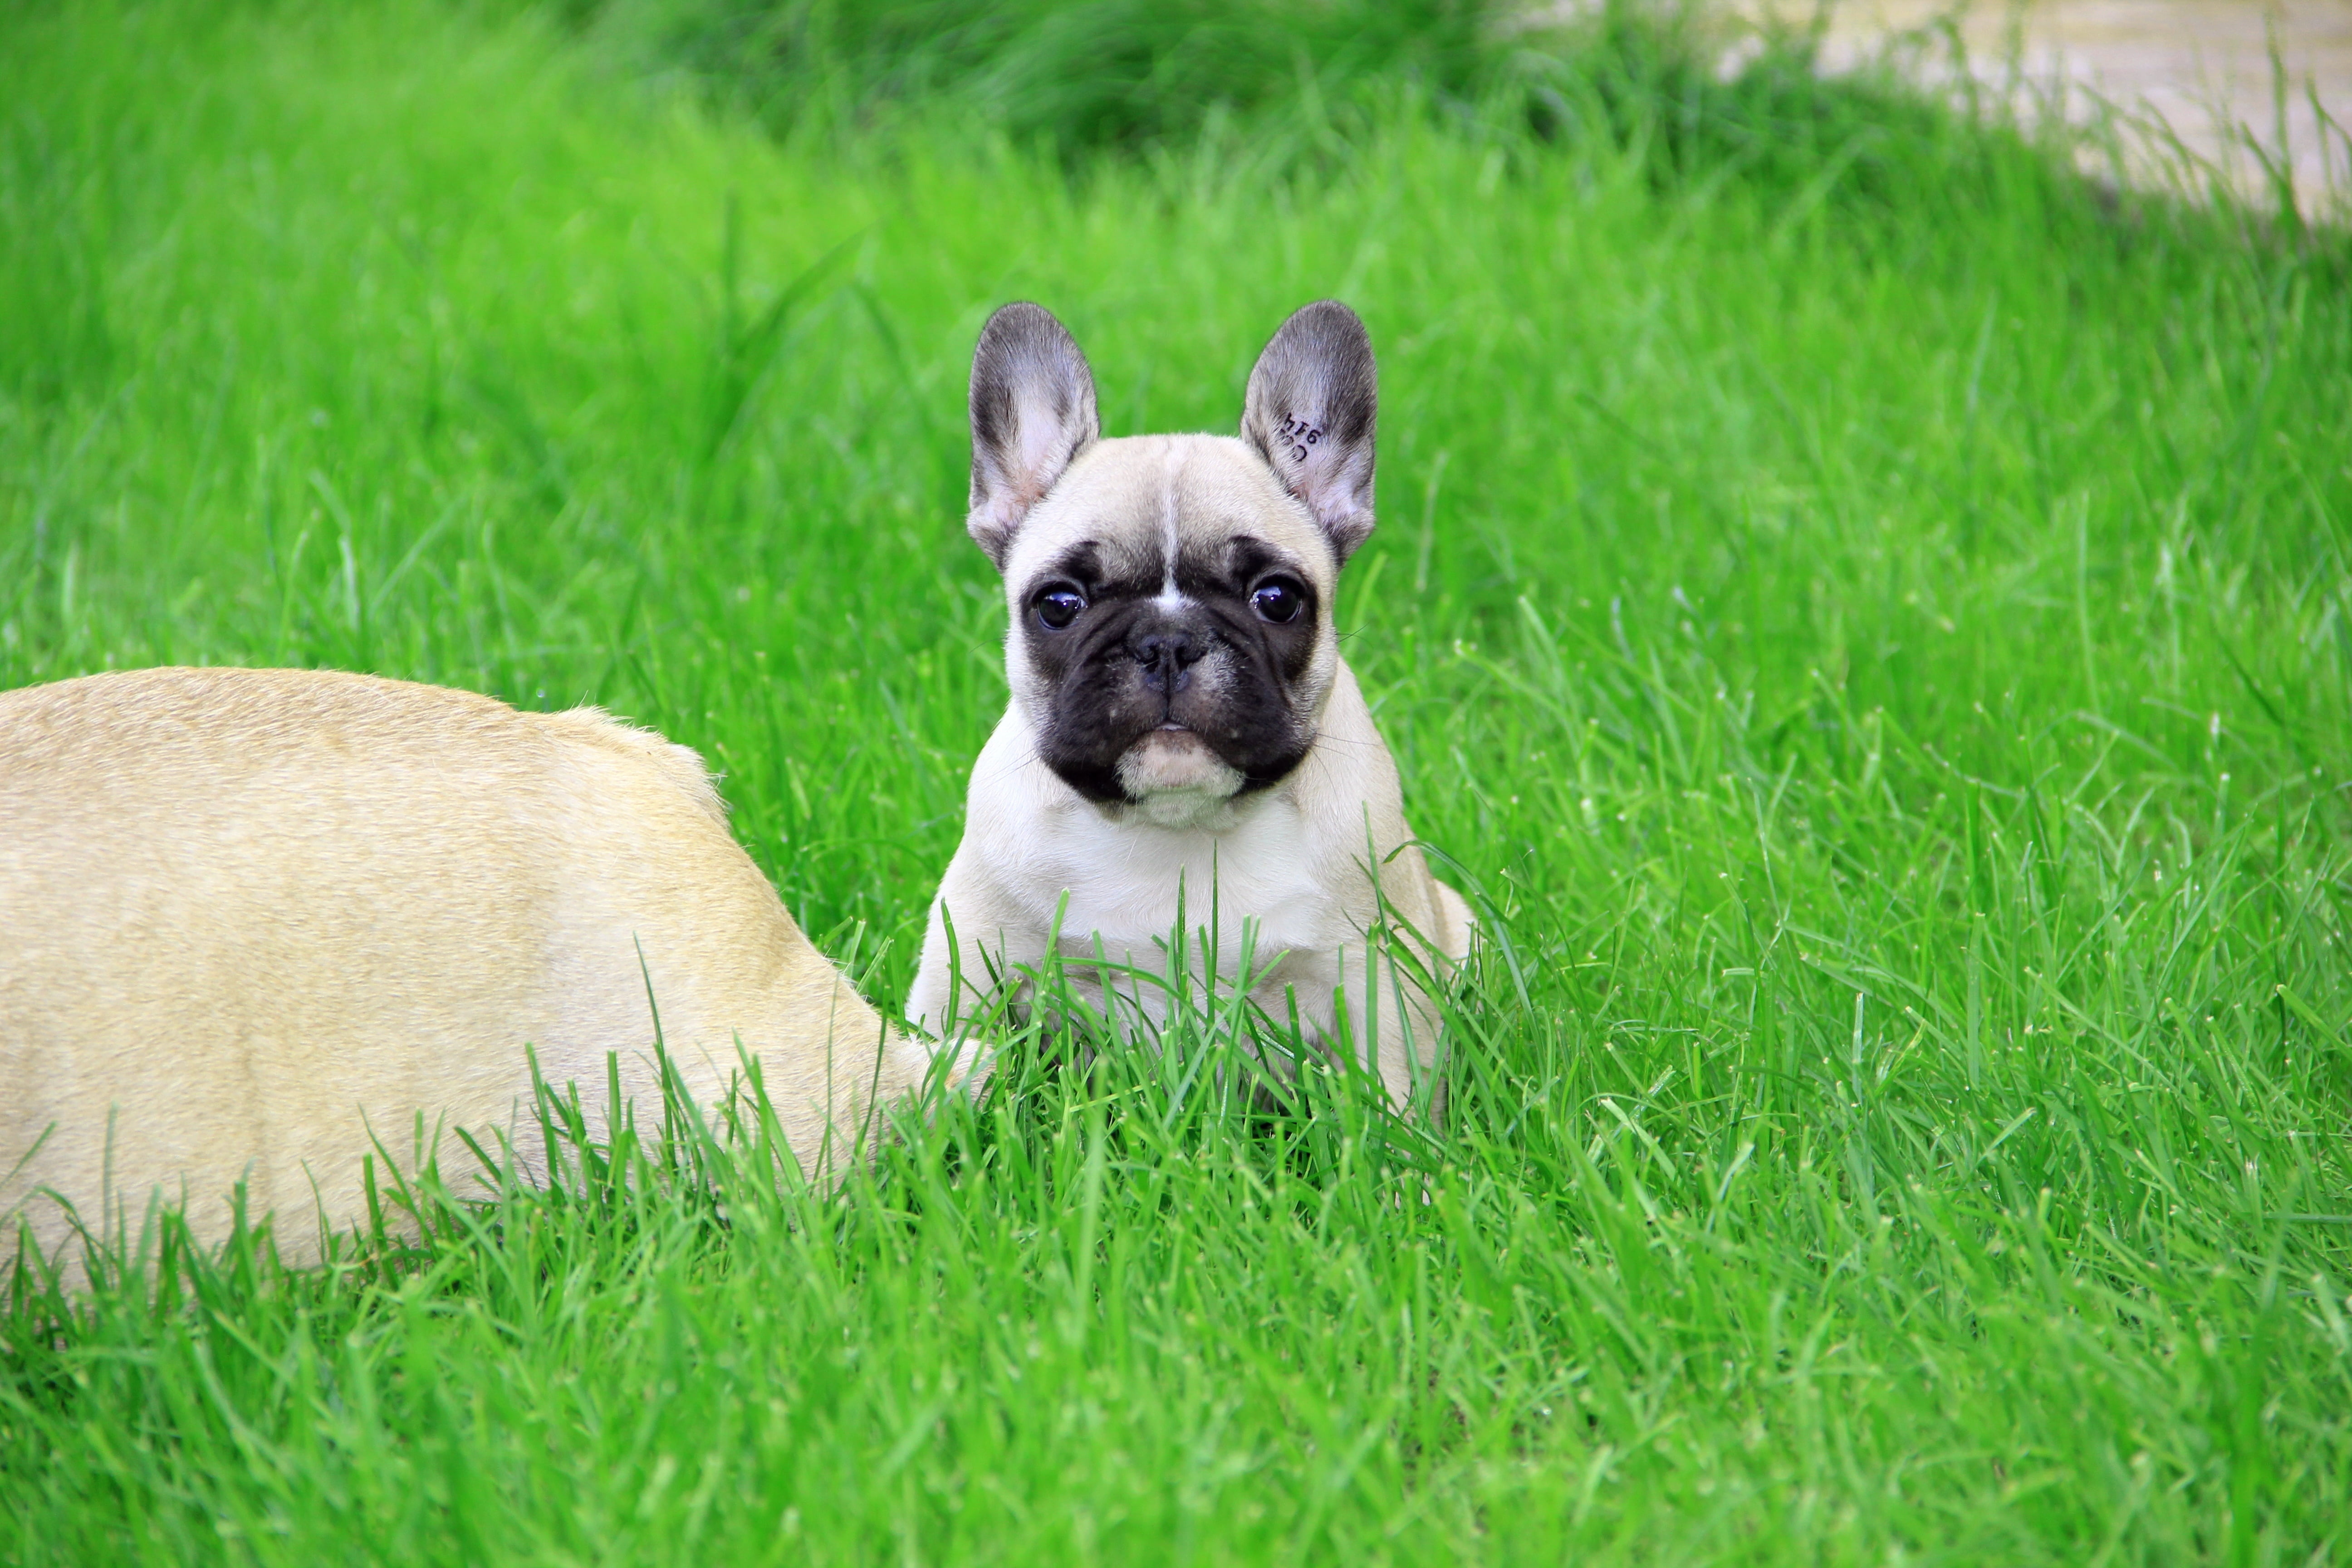 White and black short coated dog on green grass field during day time ...